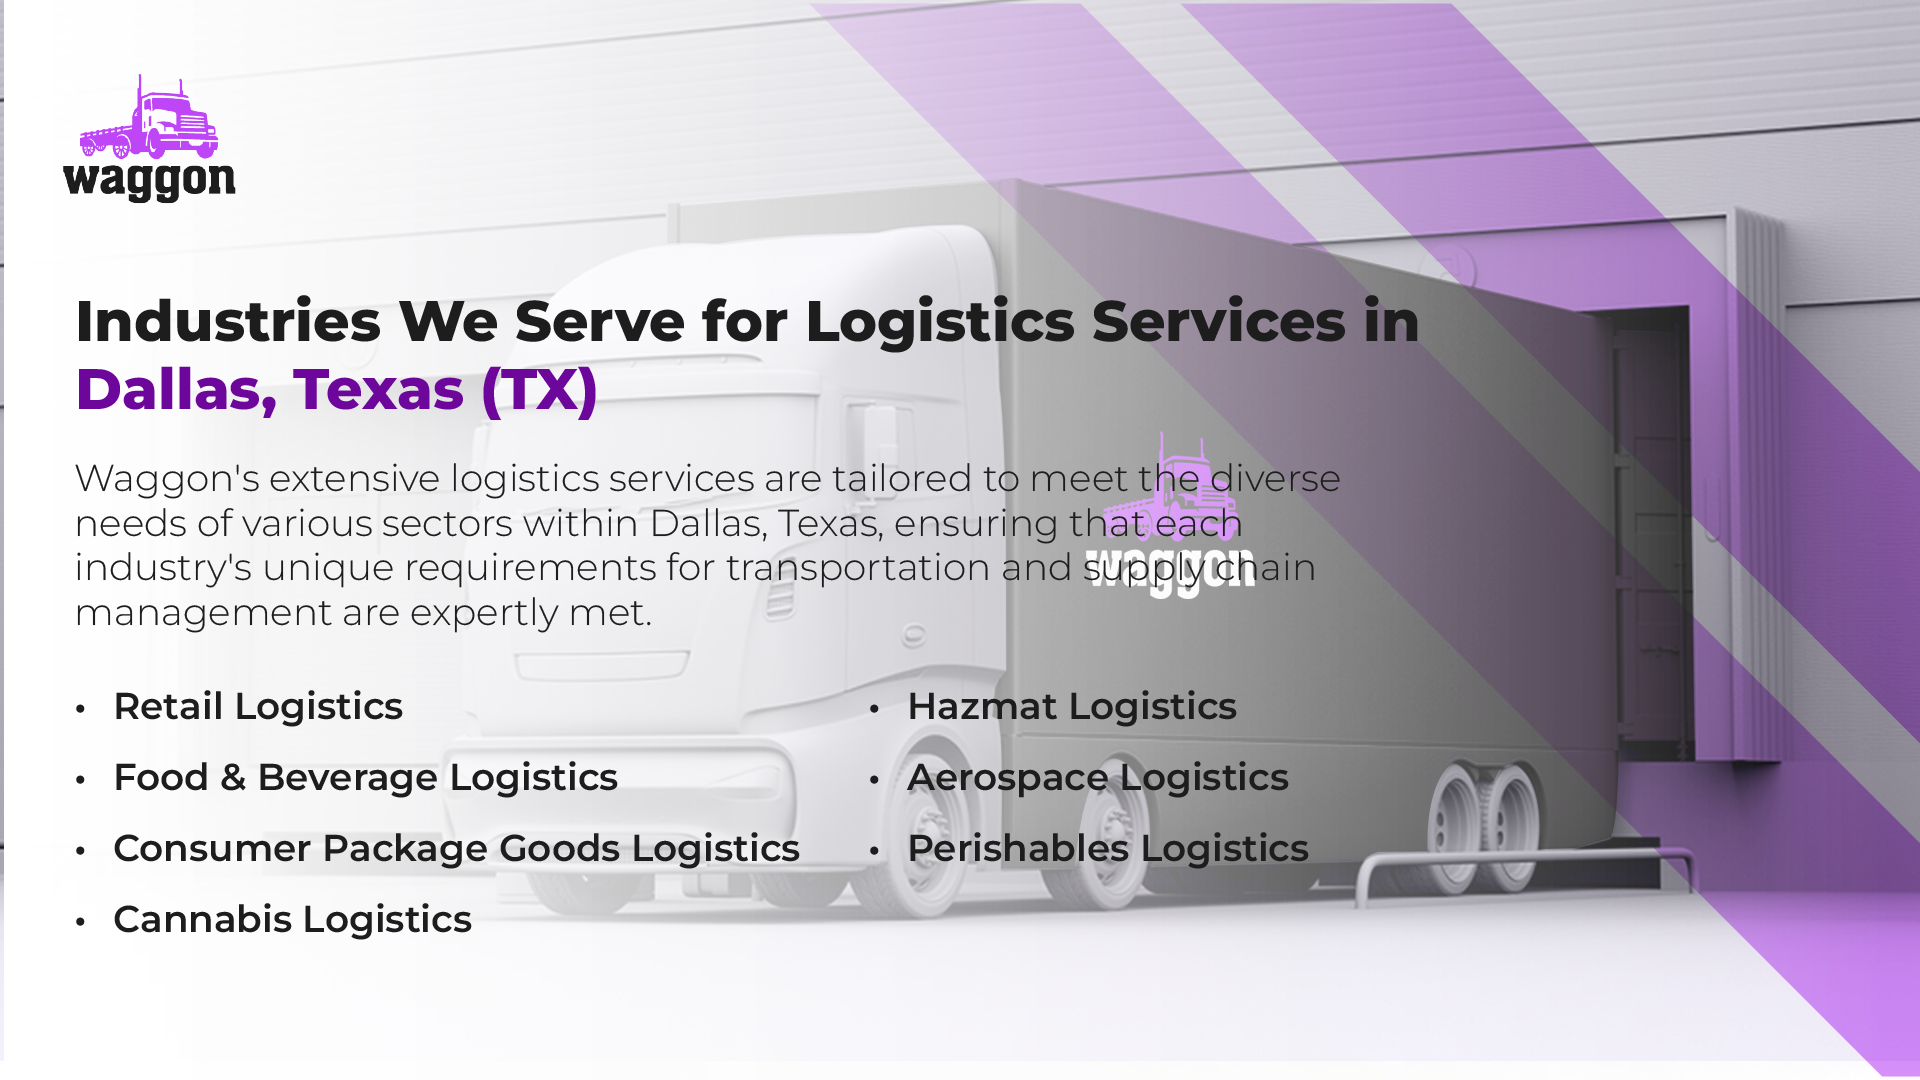 Industries We Serve for Logistics Services in Dallas, Texas (TX)